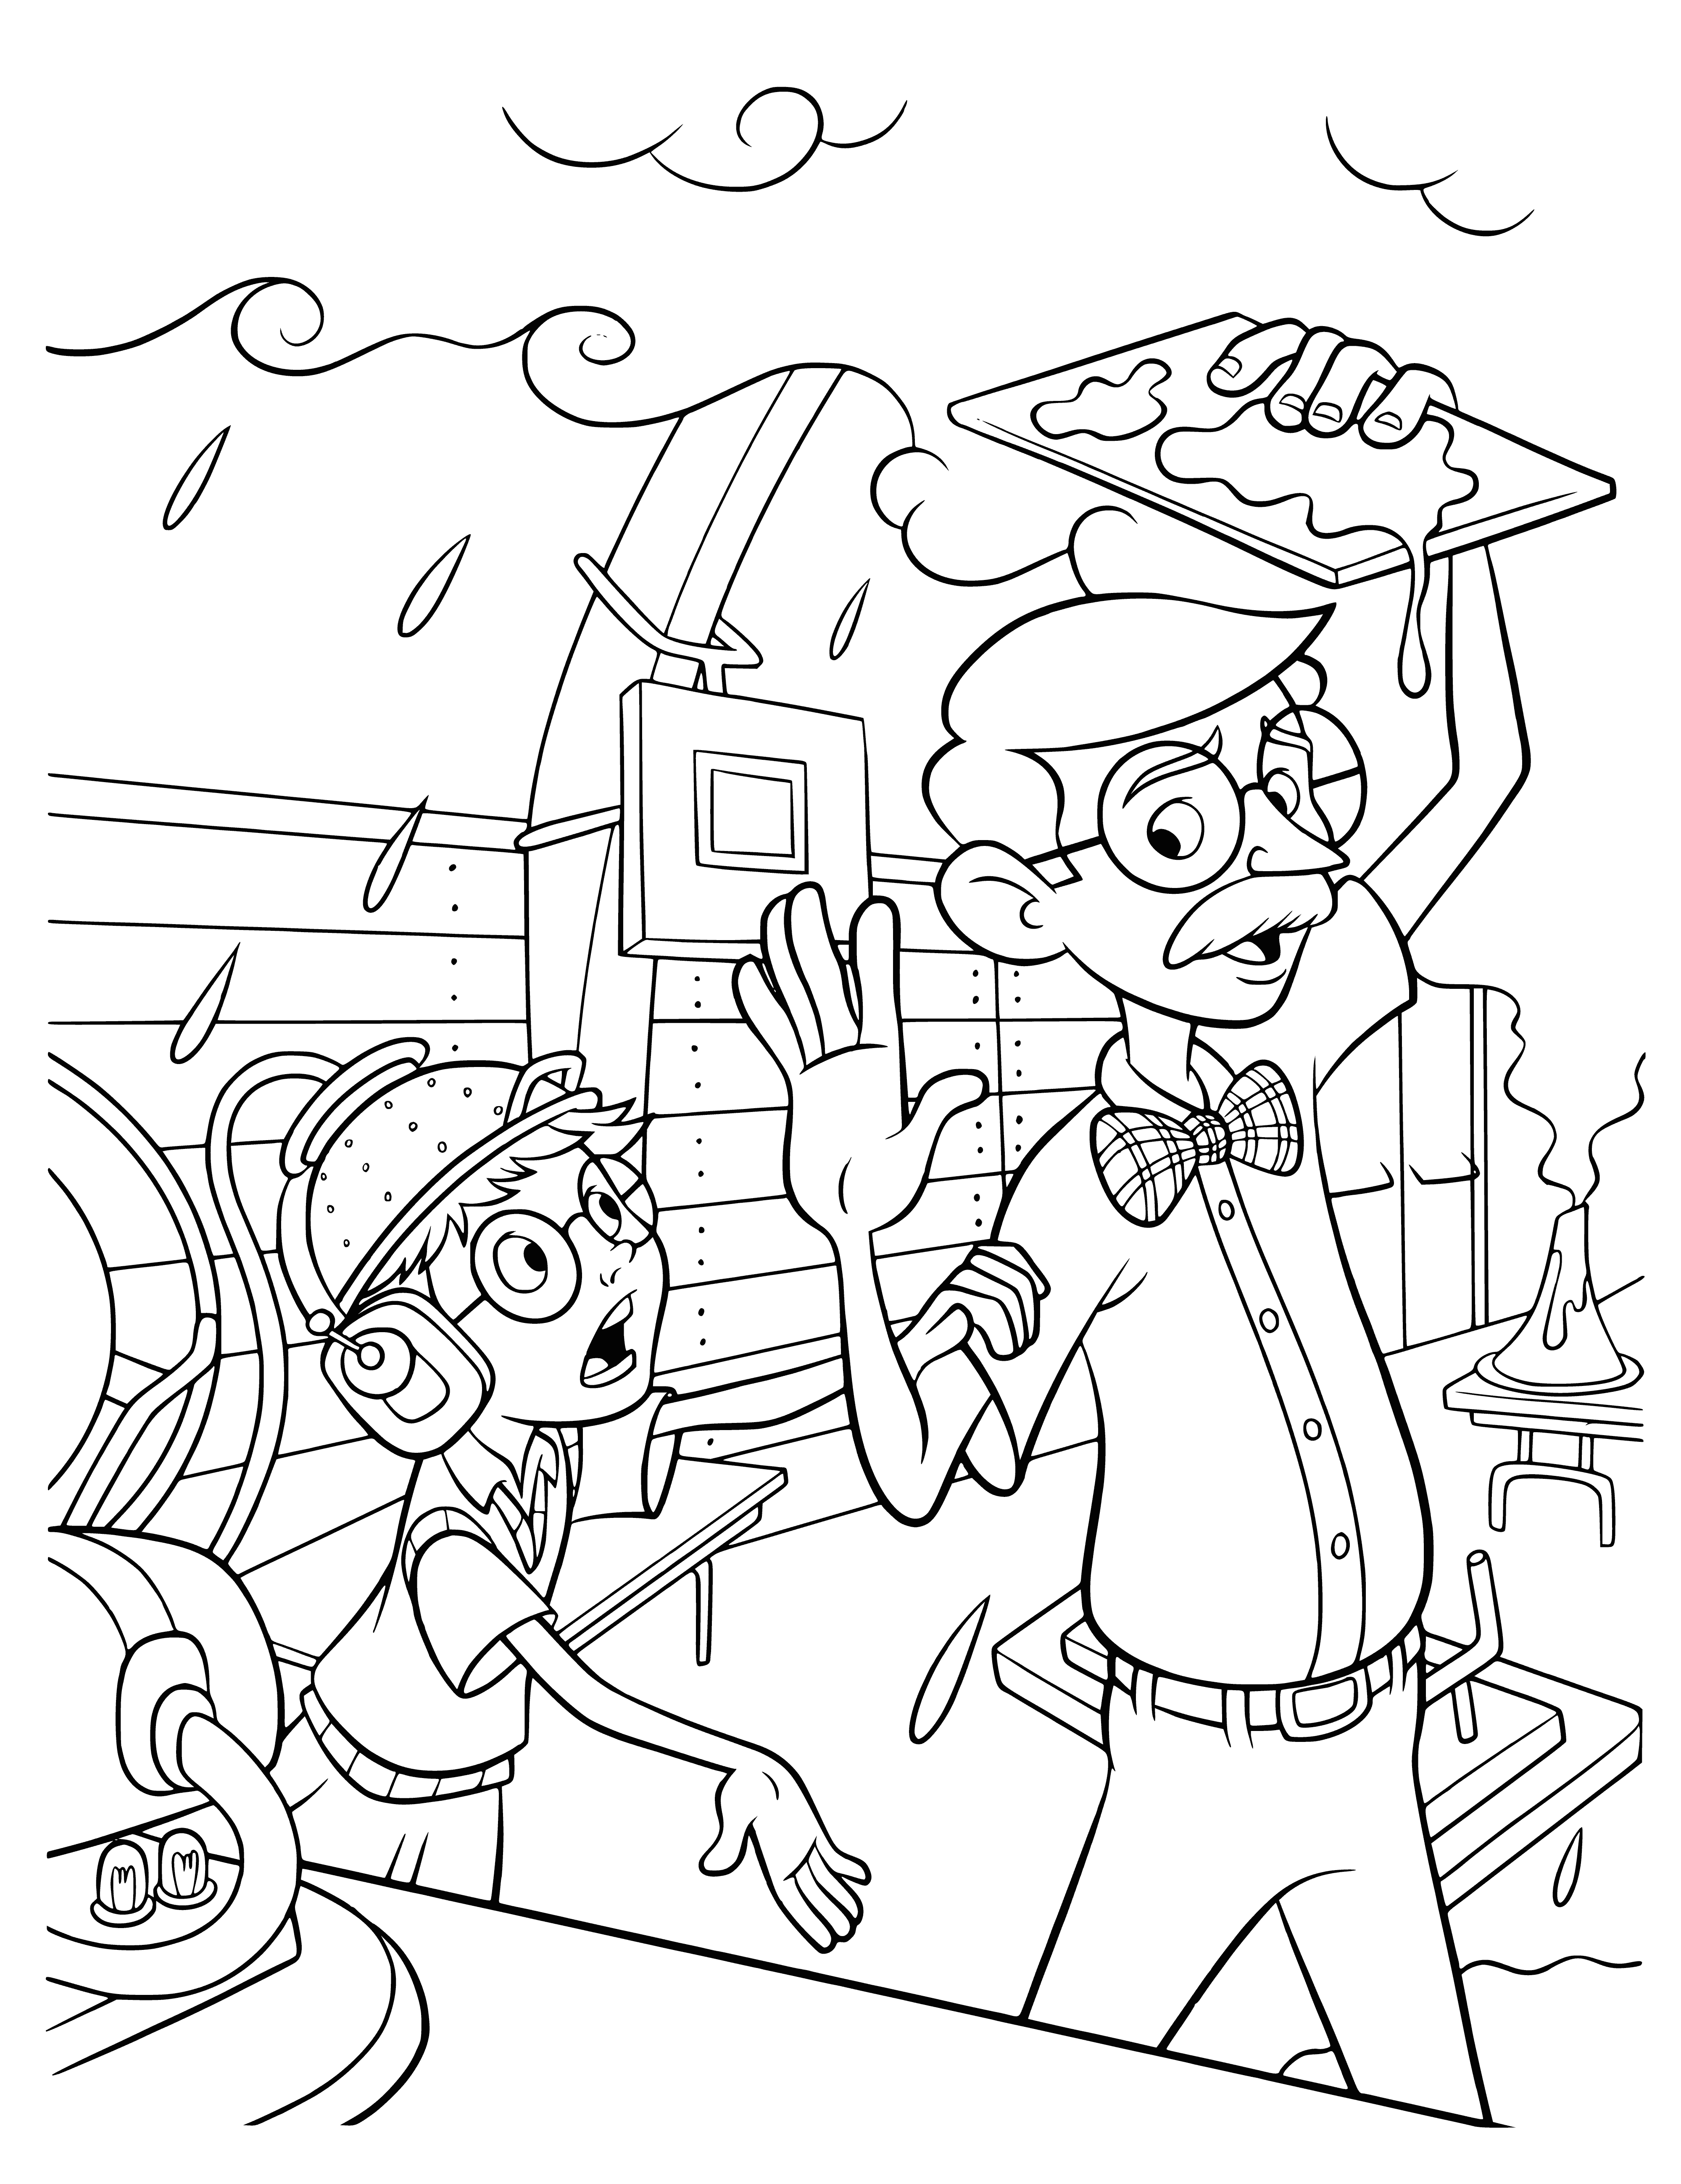 coloring page: Two kids using creative school inventions, laughing and having fun! #schoolfun